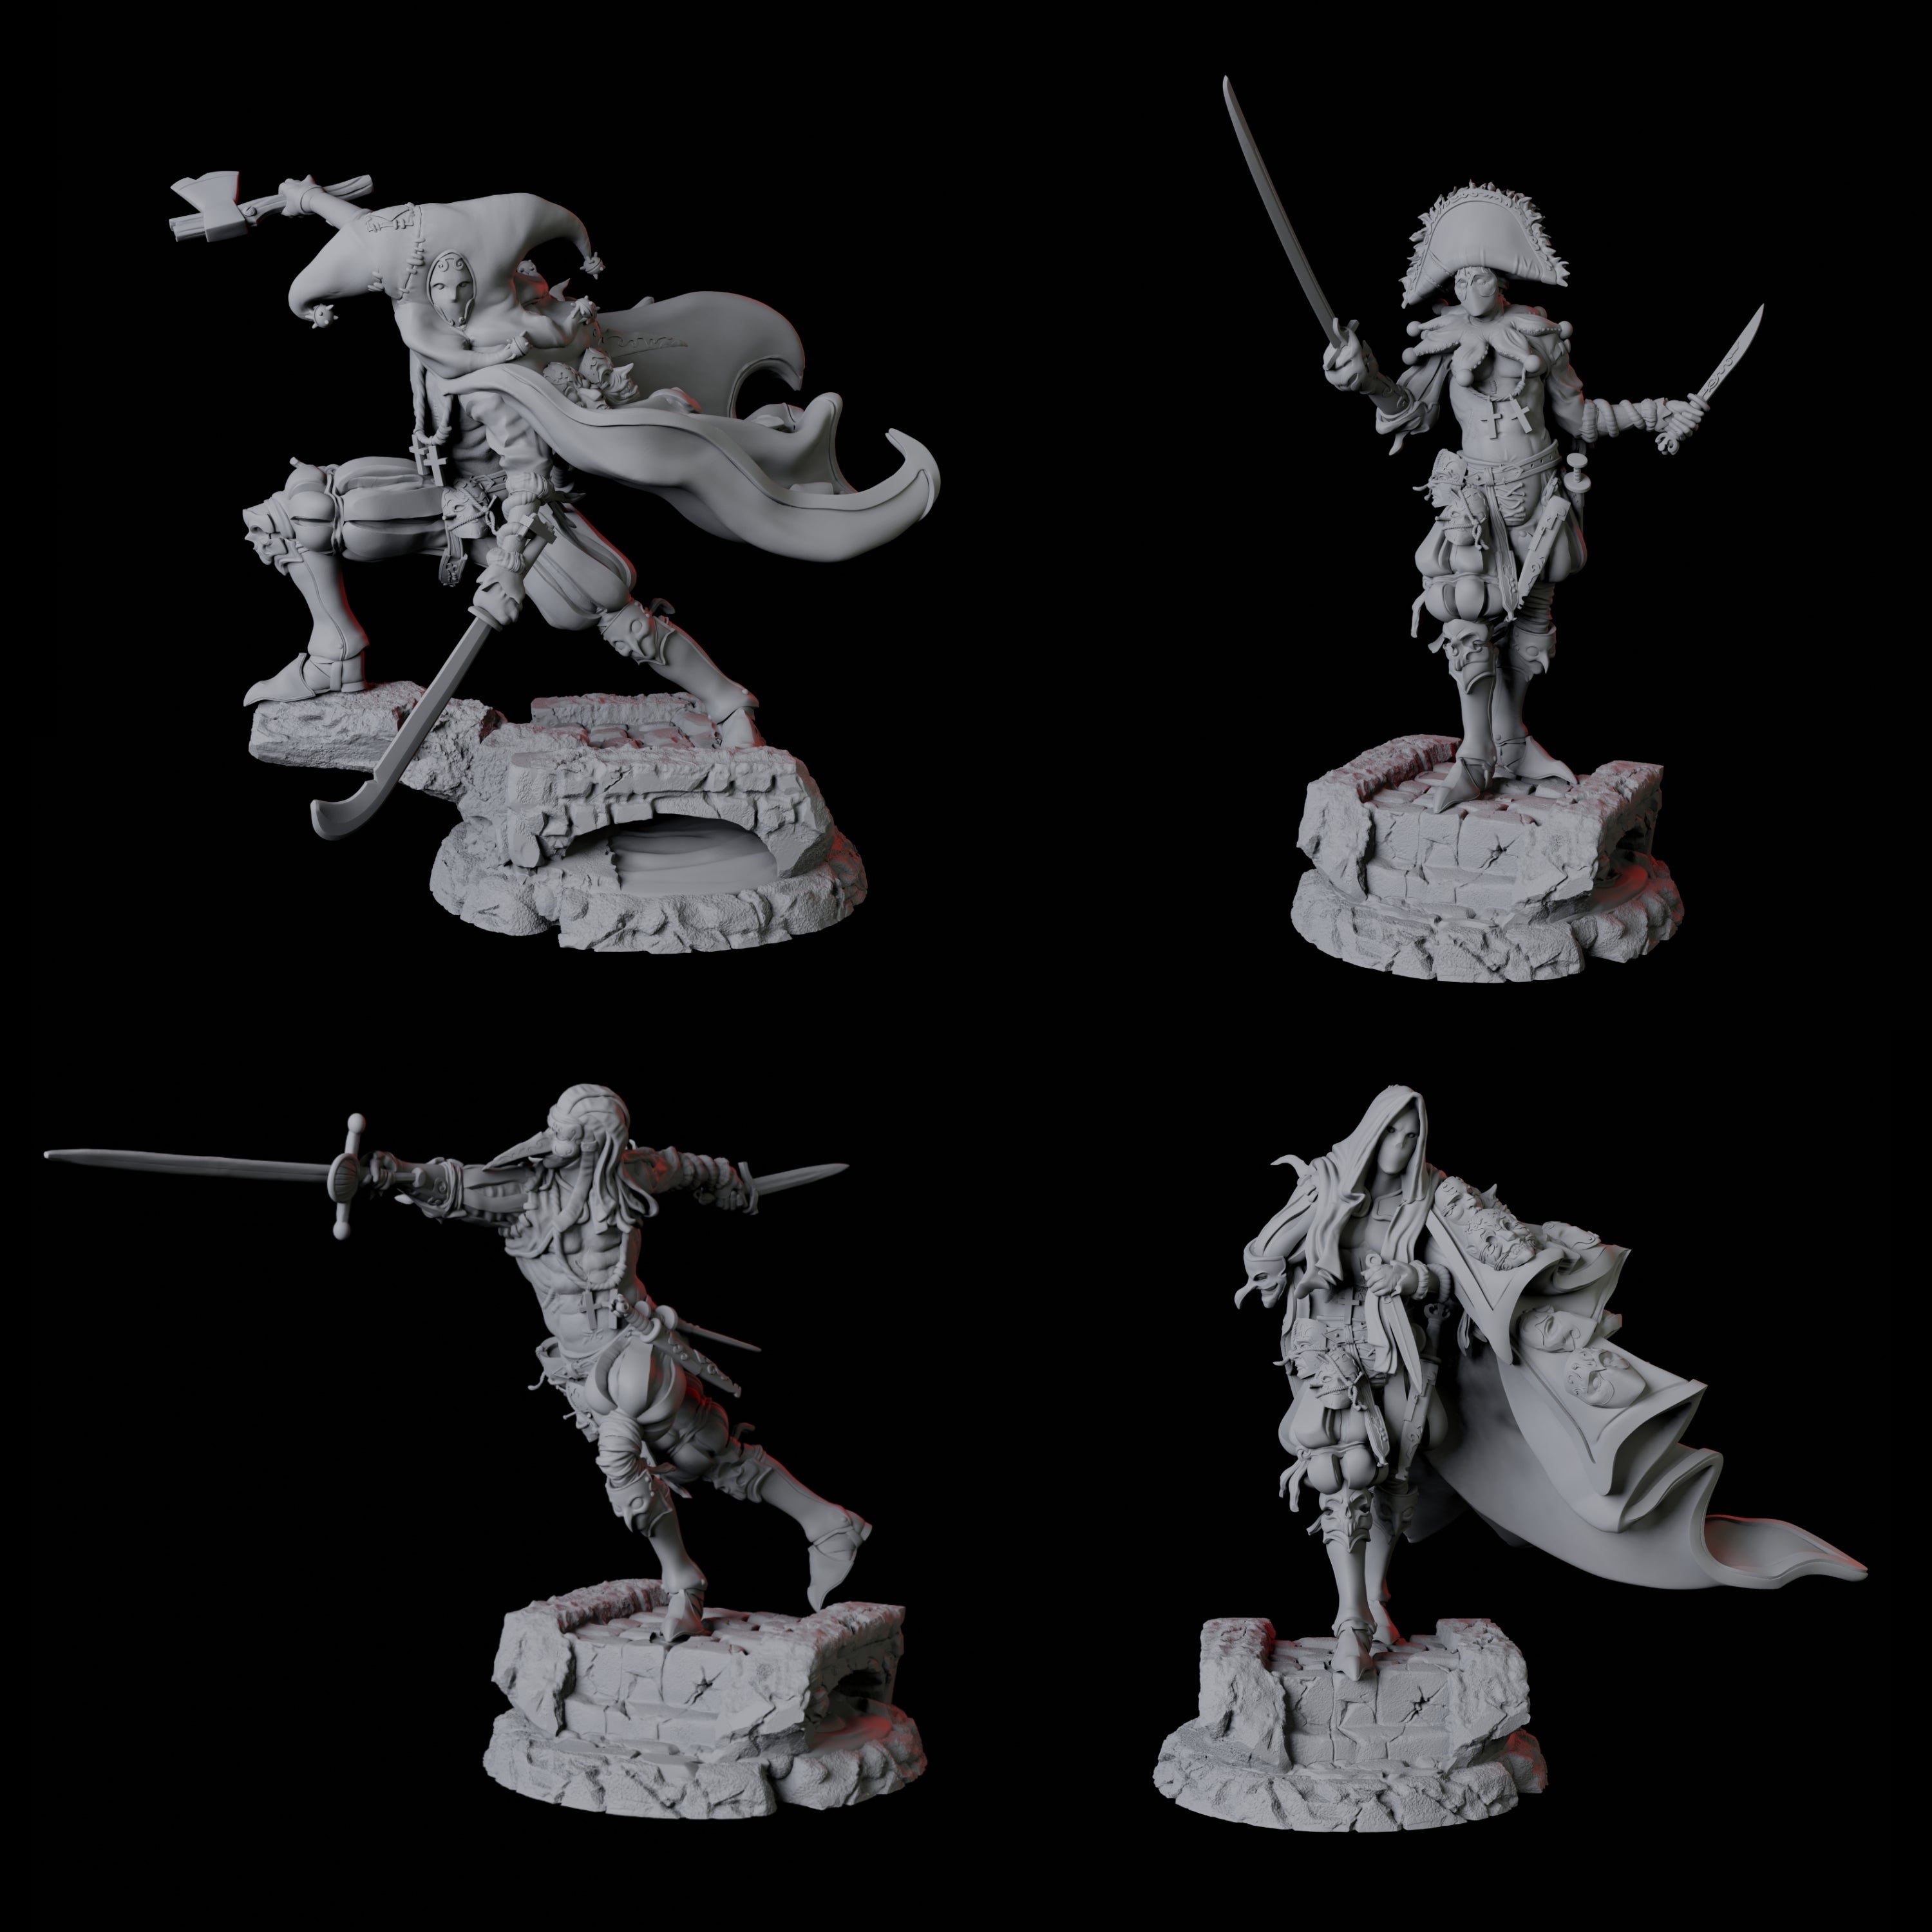 Four Masked Swordsmen Miniature for Dungeons and Dragons, Pathfinder or other TTRPGs